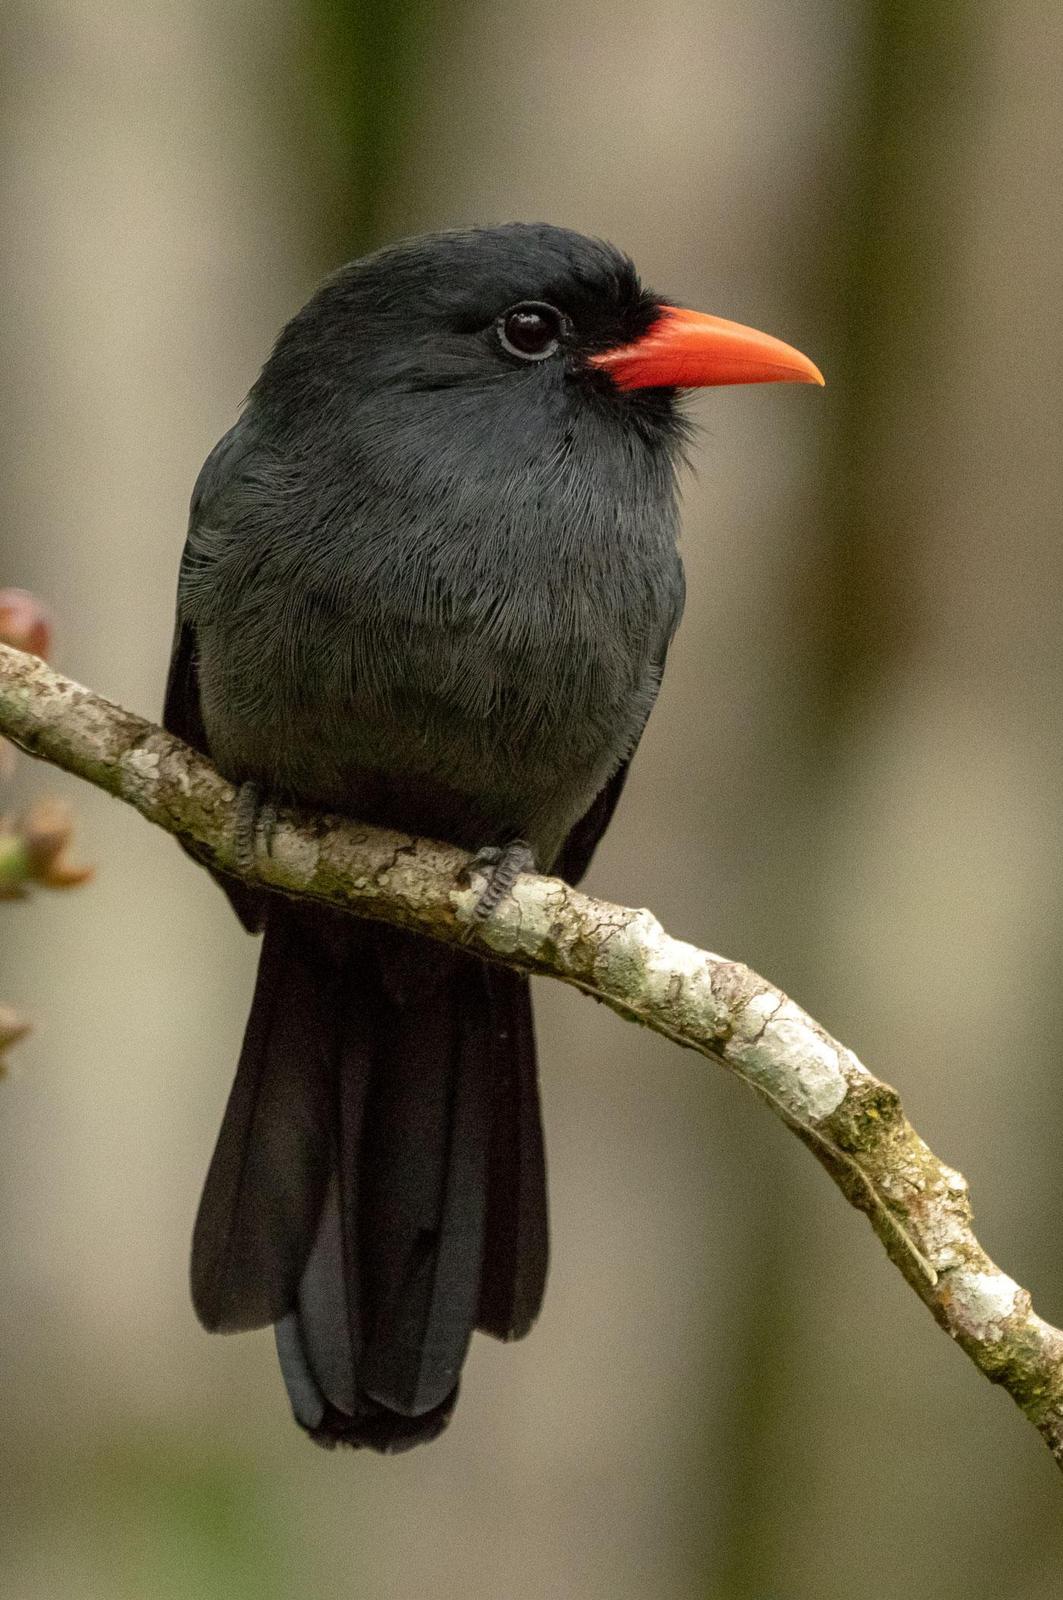 Black-fronted Nunbird Photo by Phil Kahler